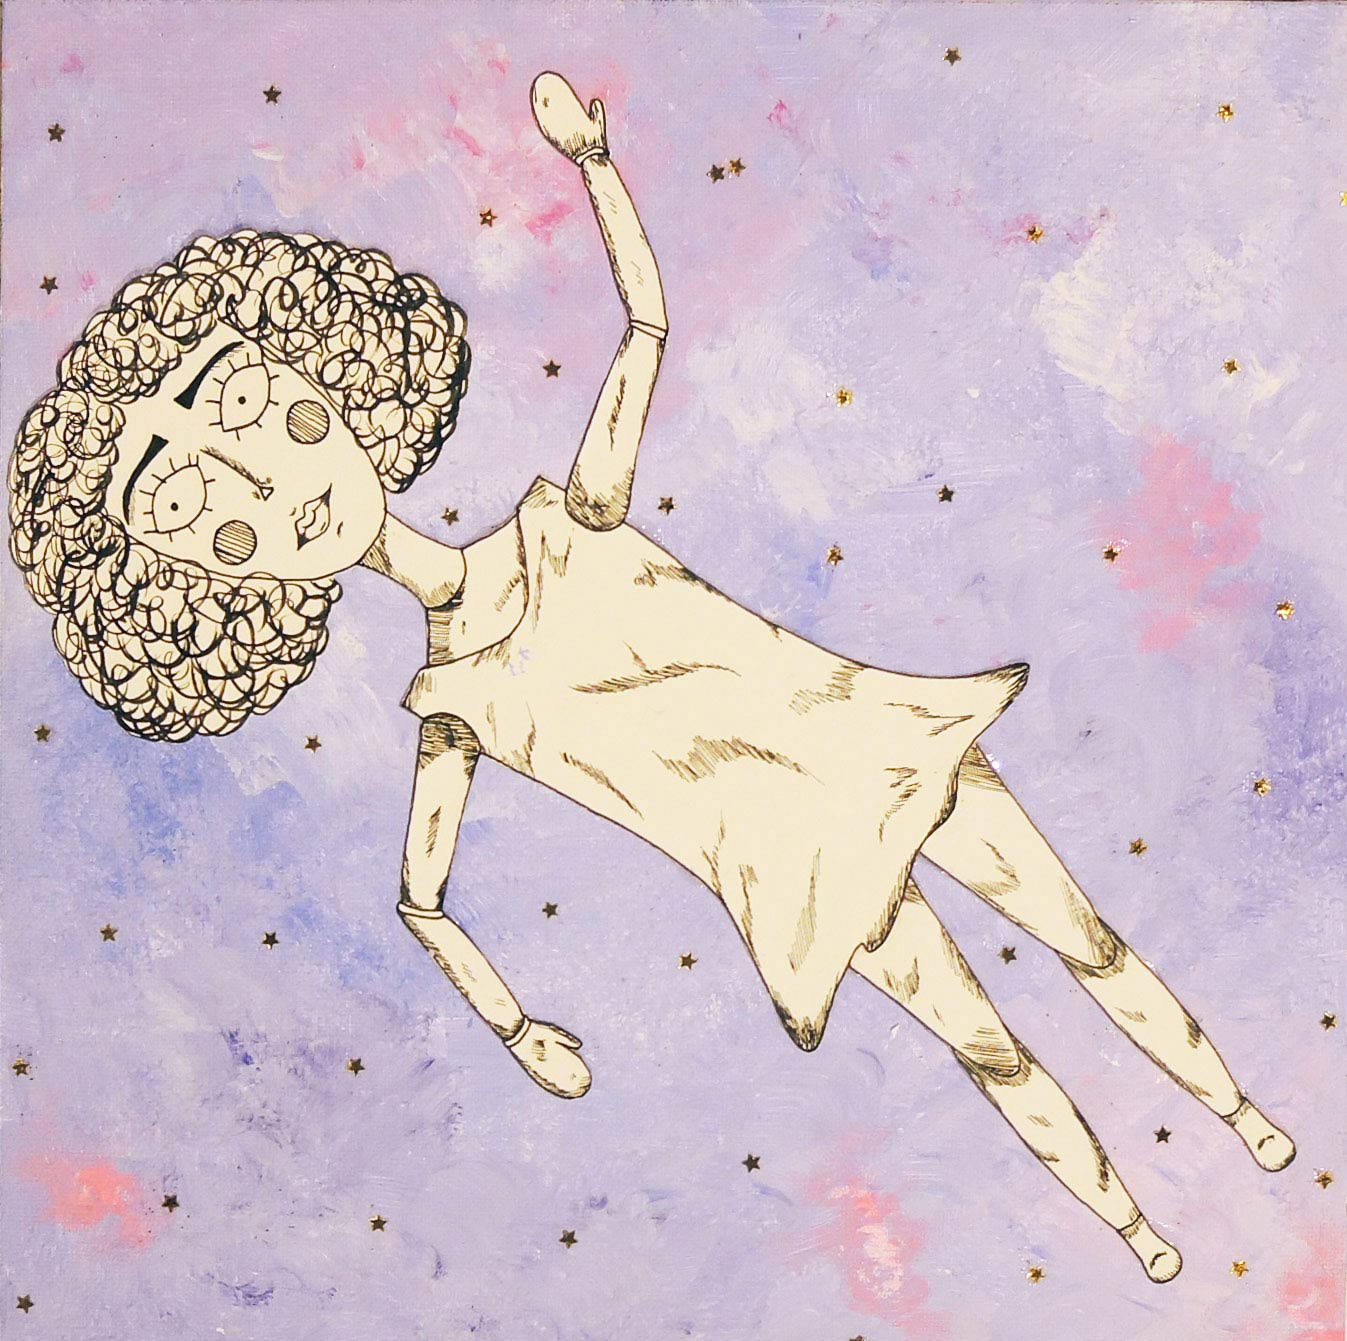 A drawing by Tahiri Guevara of an girl floating in a purple starry background